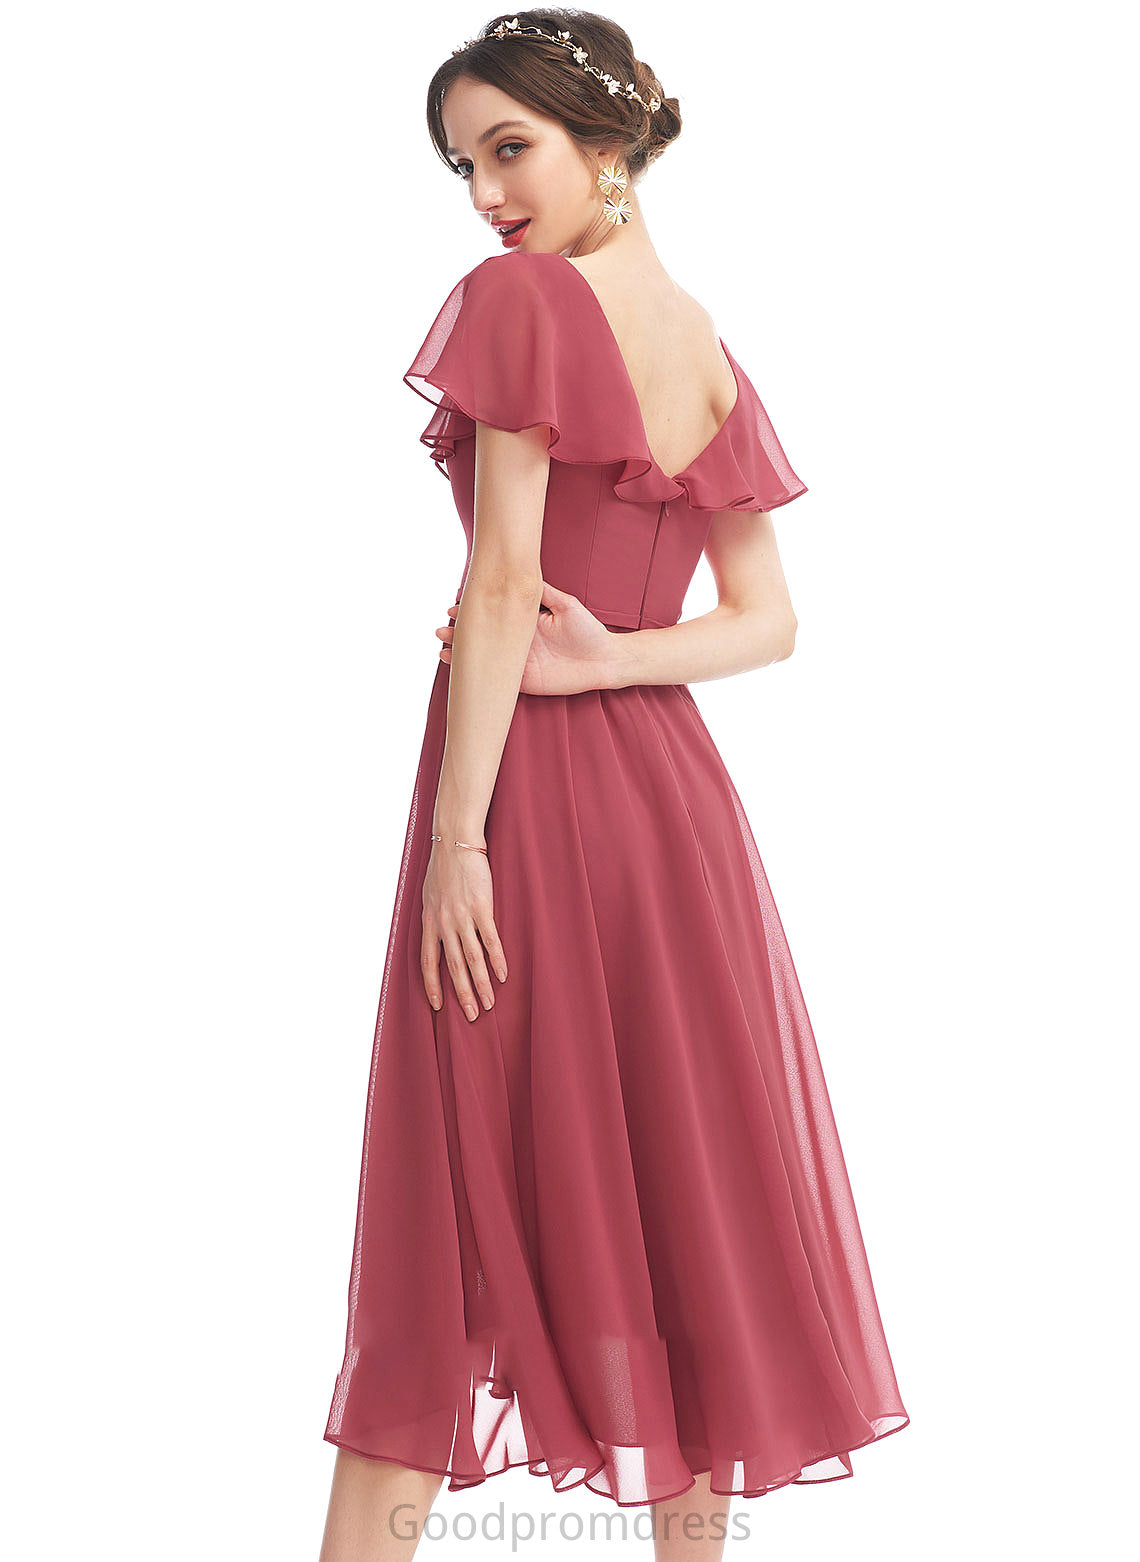 Ruffle Fabric Asymmetrical Silhouette Embellishment Length Neckline A-Line V-neck Camryn Tulle Off The Shoulder Bridesmaid Dresses